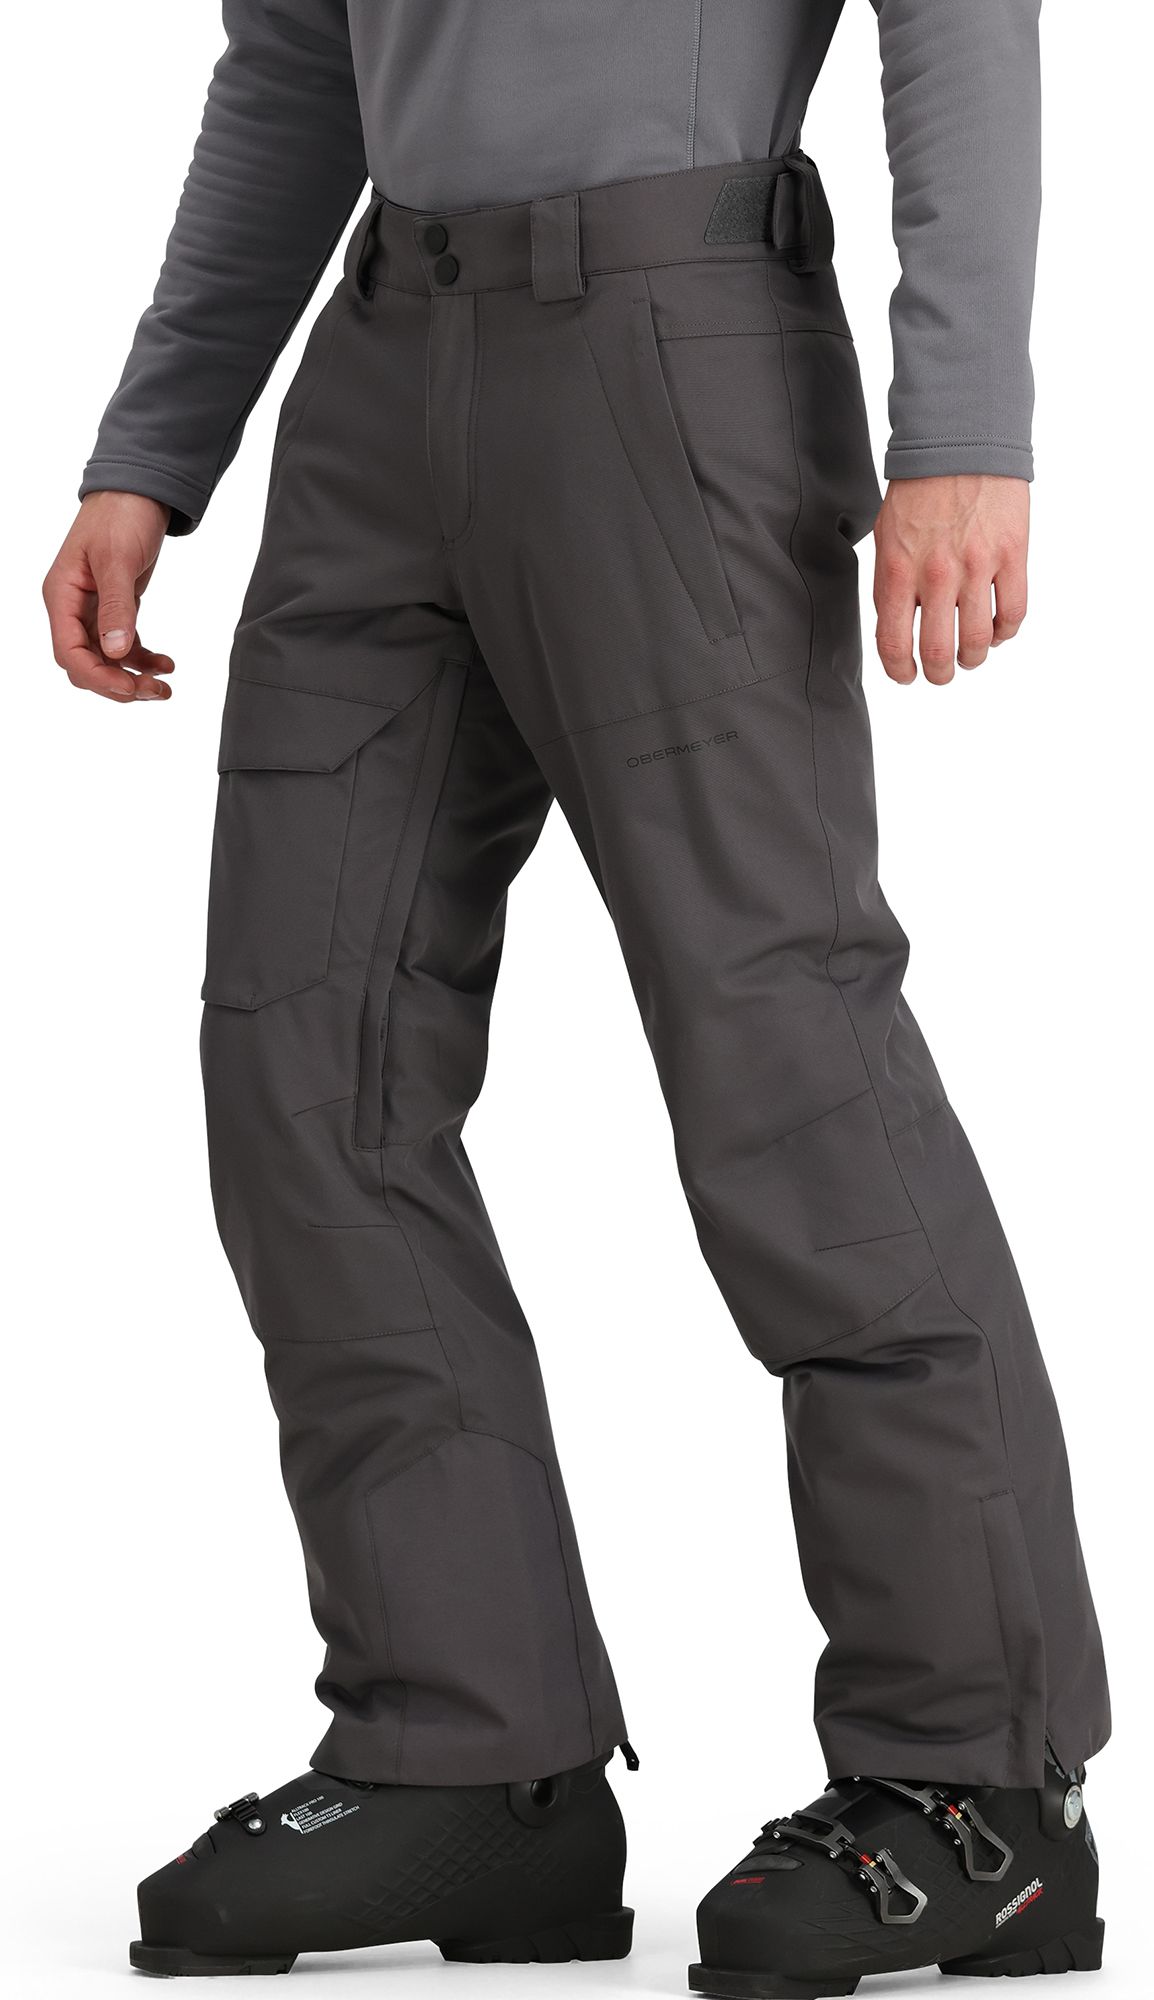 Dick's Sporting Goods Obermeyer Men's Orion Pants | The Market Place